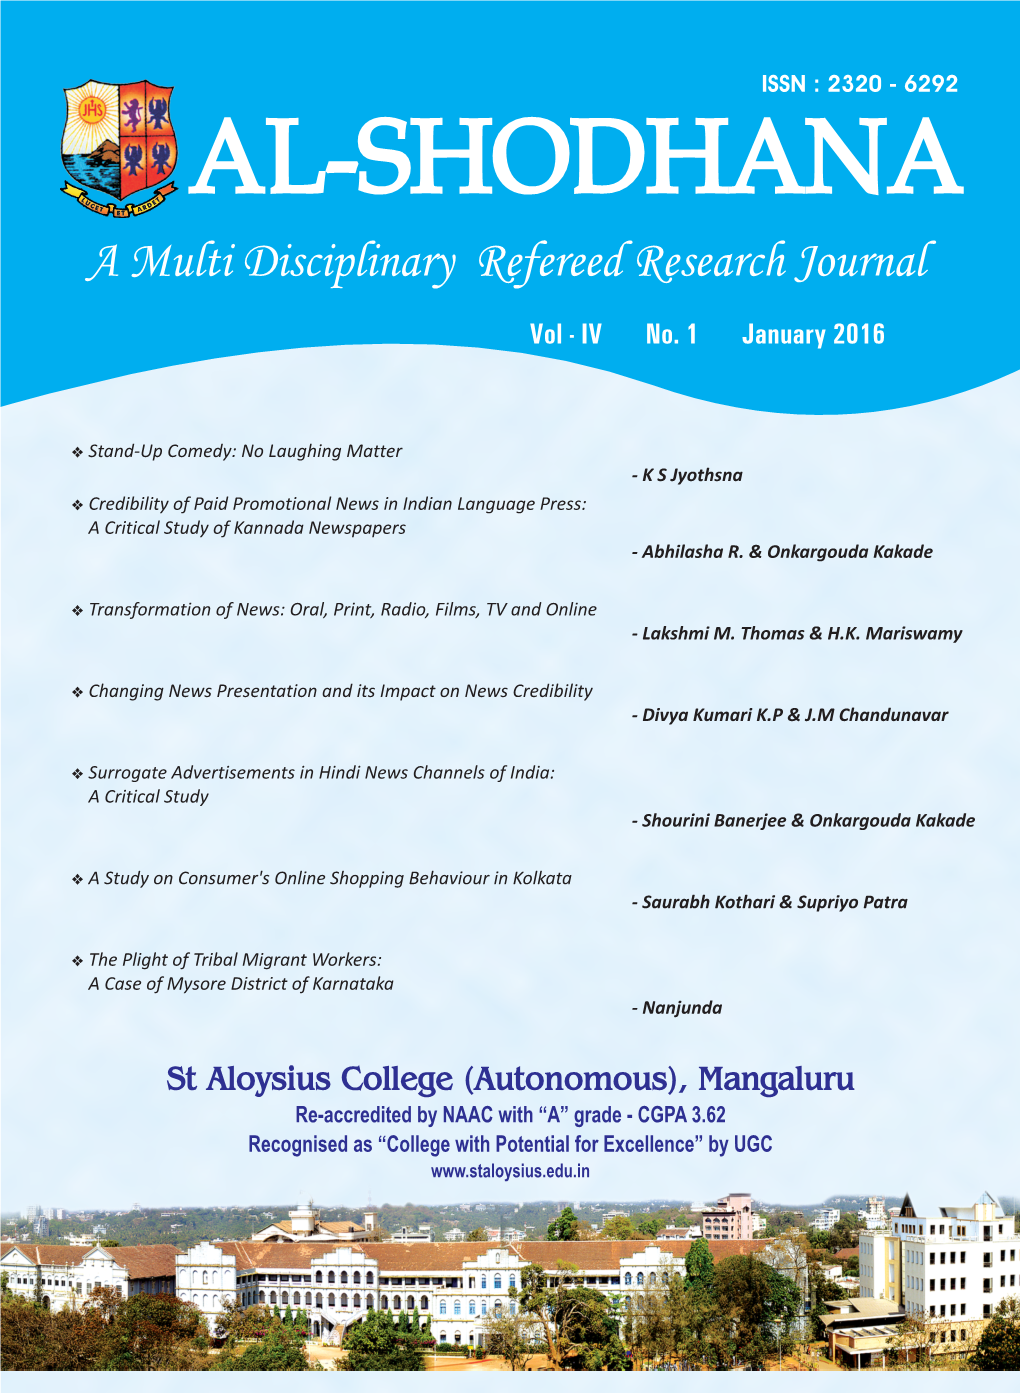 2016 AL-SHODHANA a Multi Disciplinary Refereed Research Journal ISSN : 2320 - 6292 CONTENTS